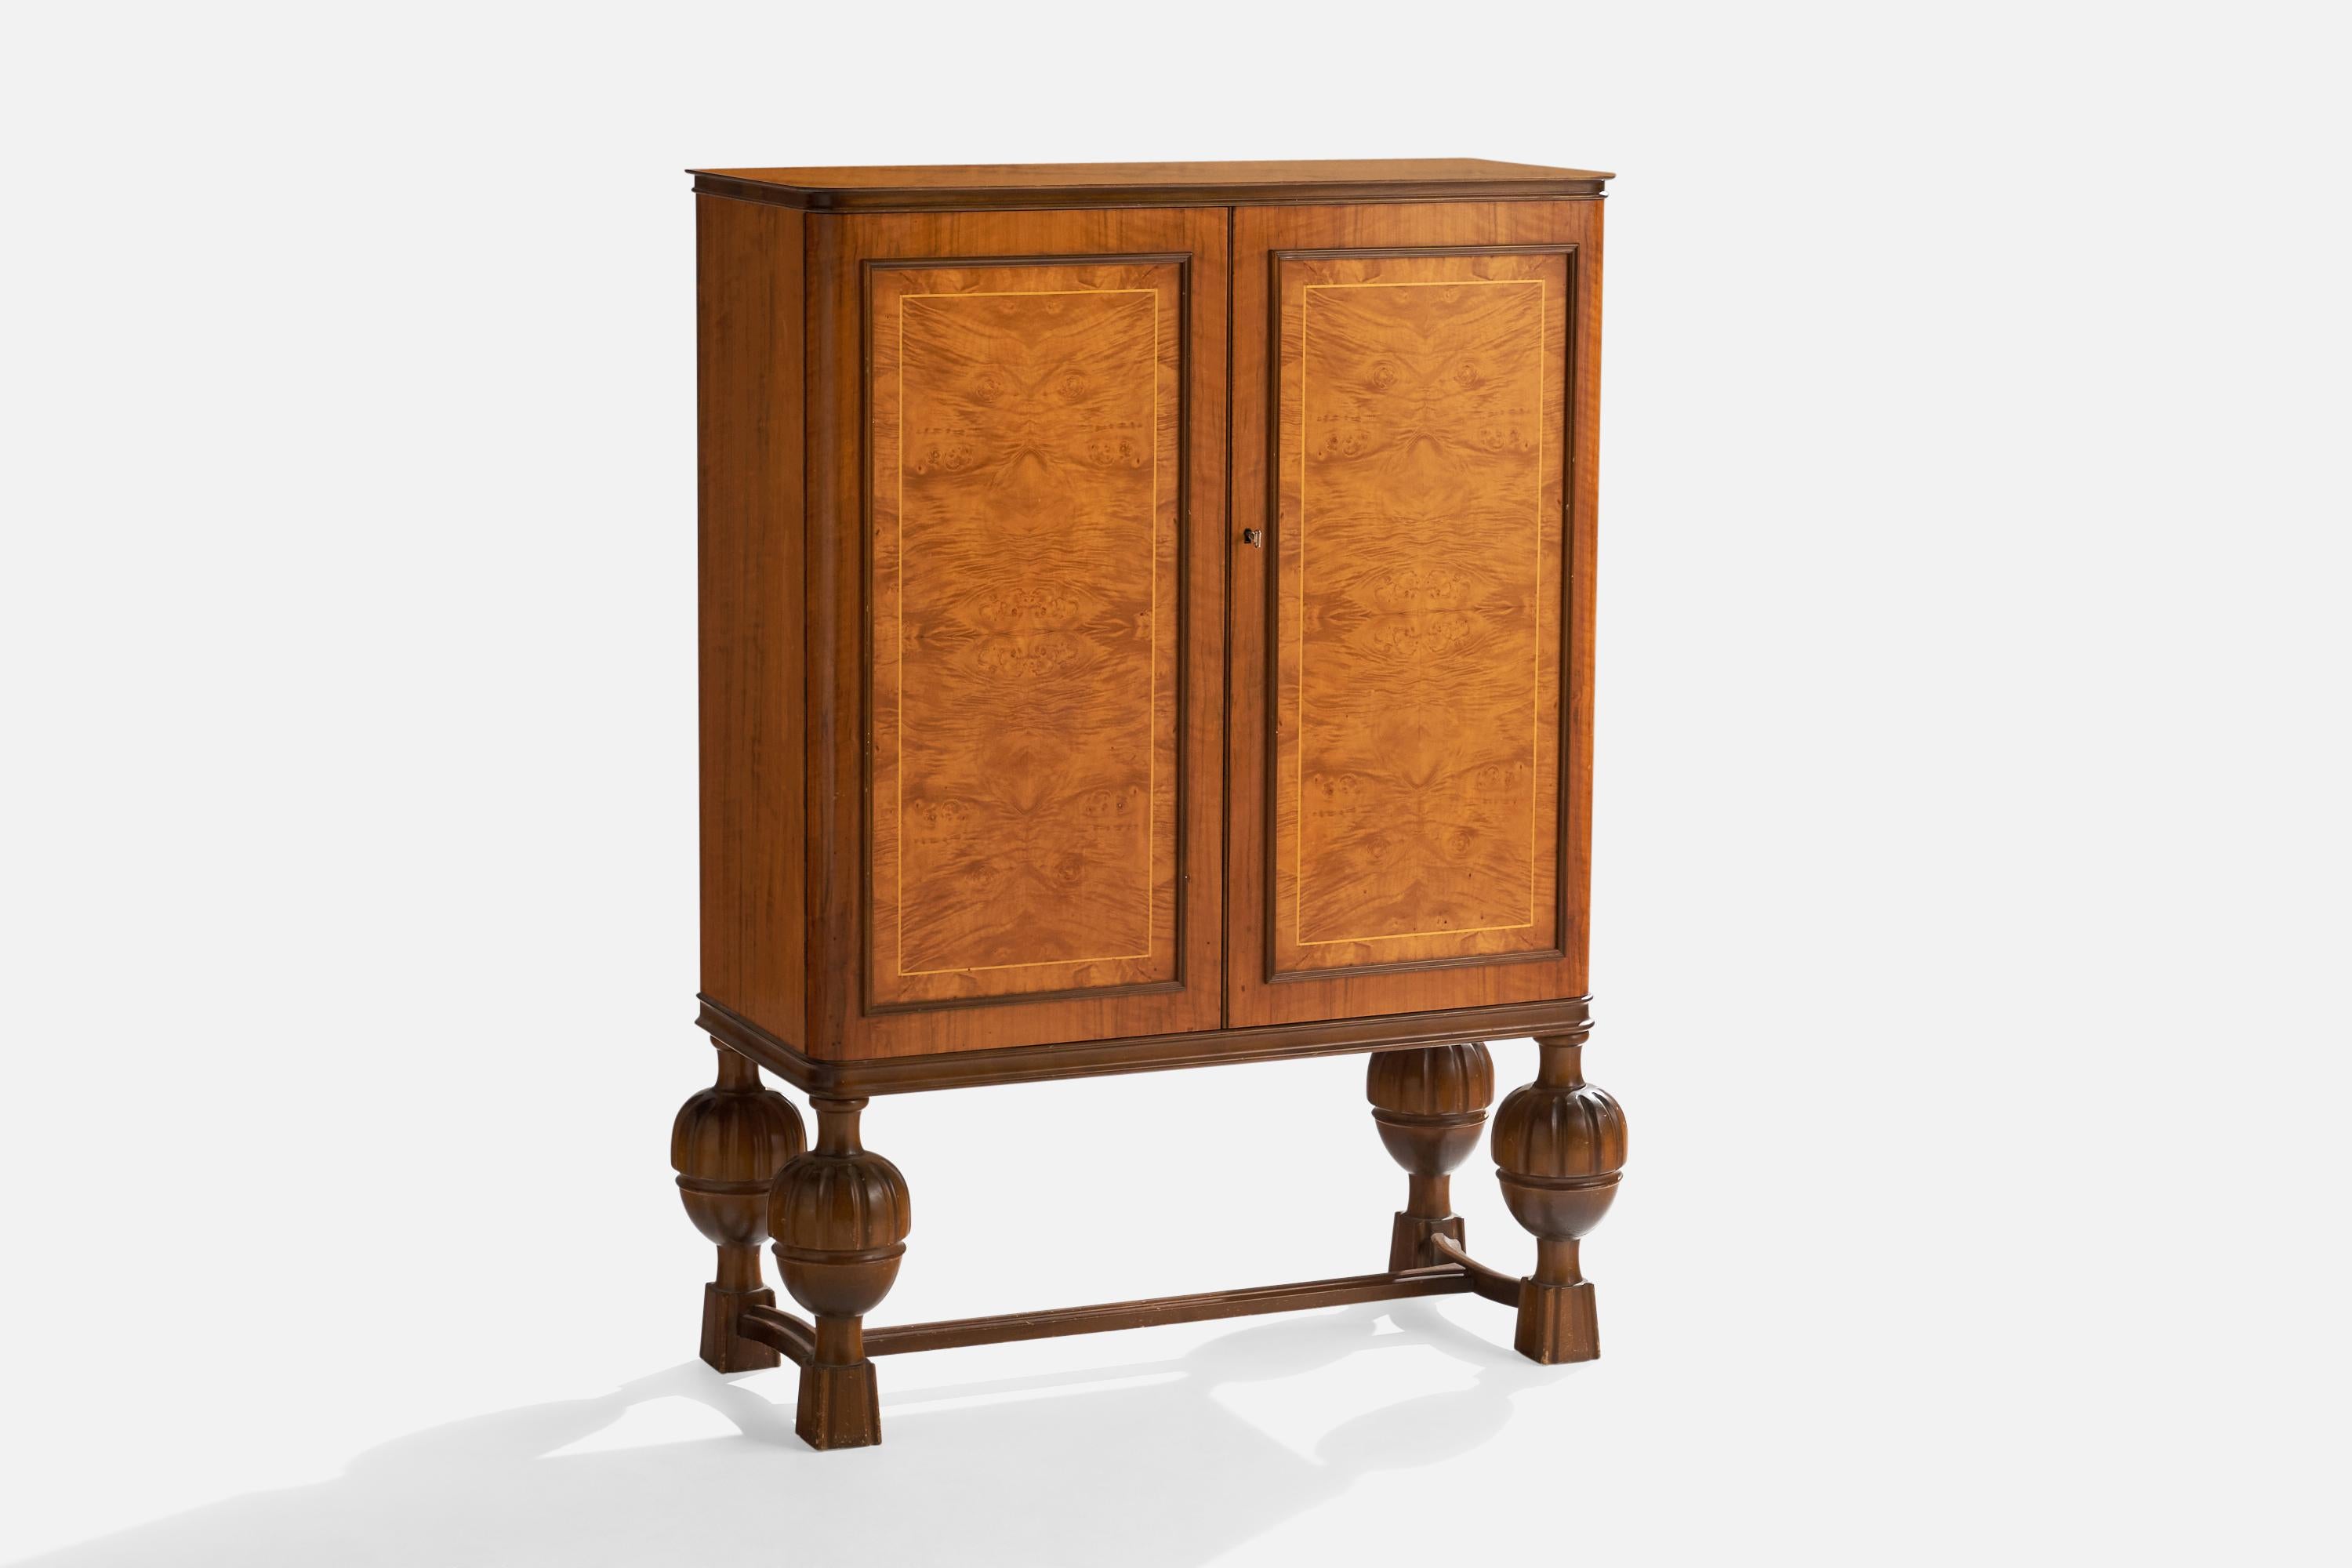 A elm and birch cabinet designed and produced in Sweden, c. 1920s.